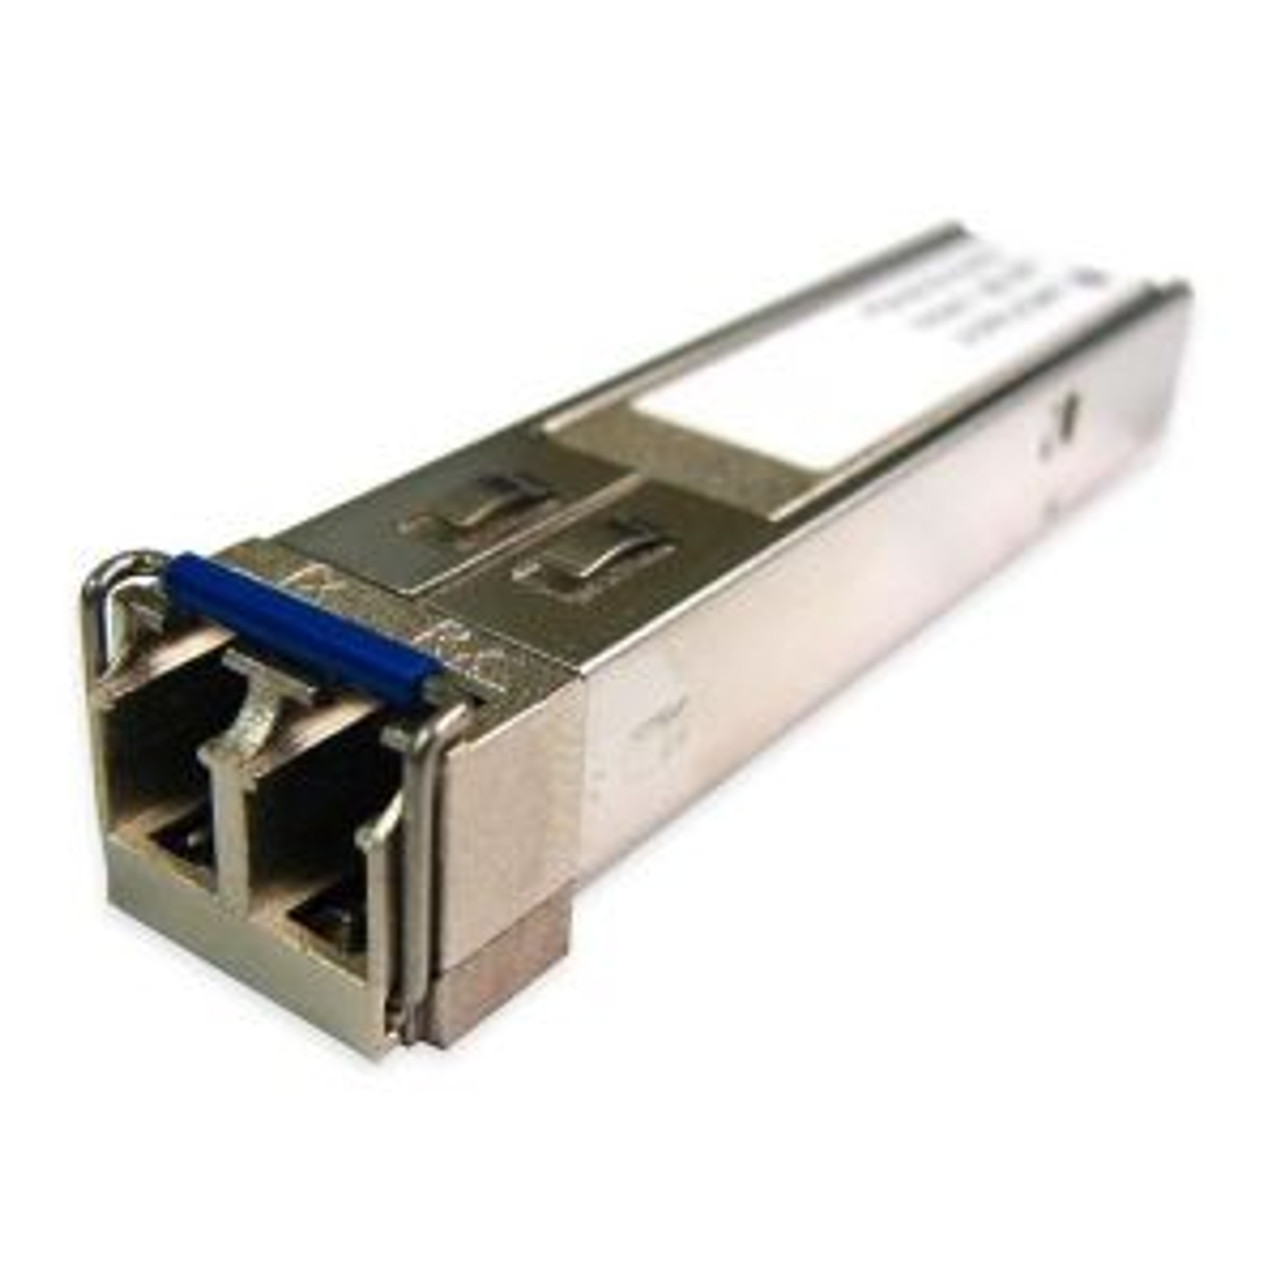 39496 | Cables To Go | 1000Base-LX 1310nm 10km SFP Transceiver Module